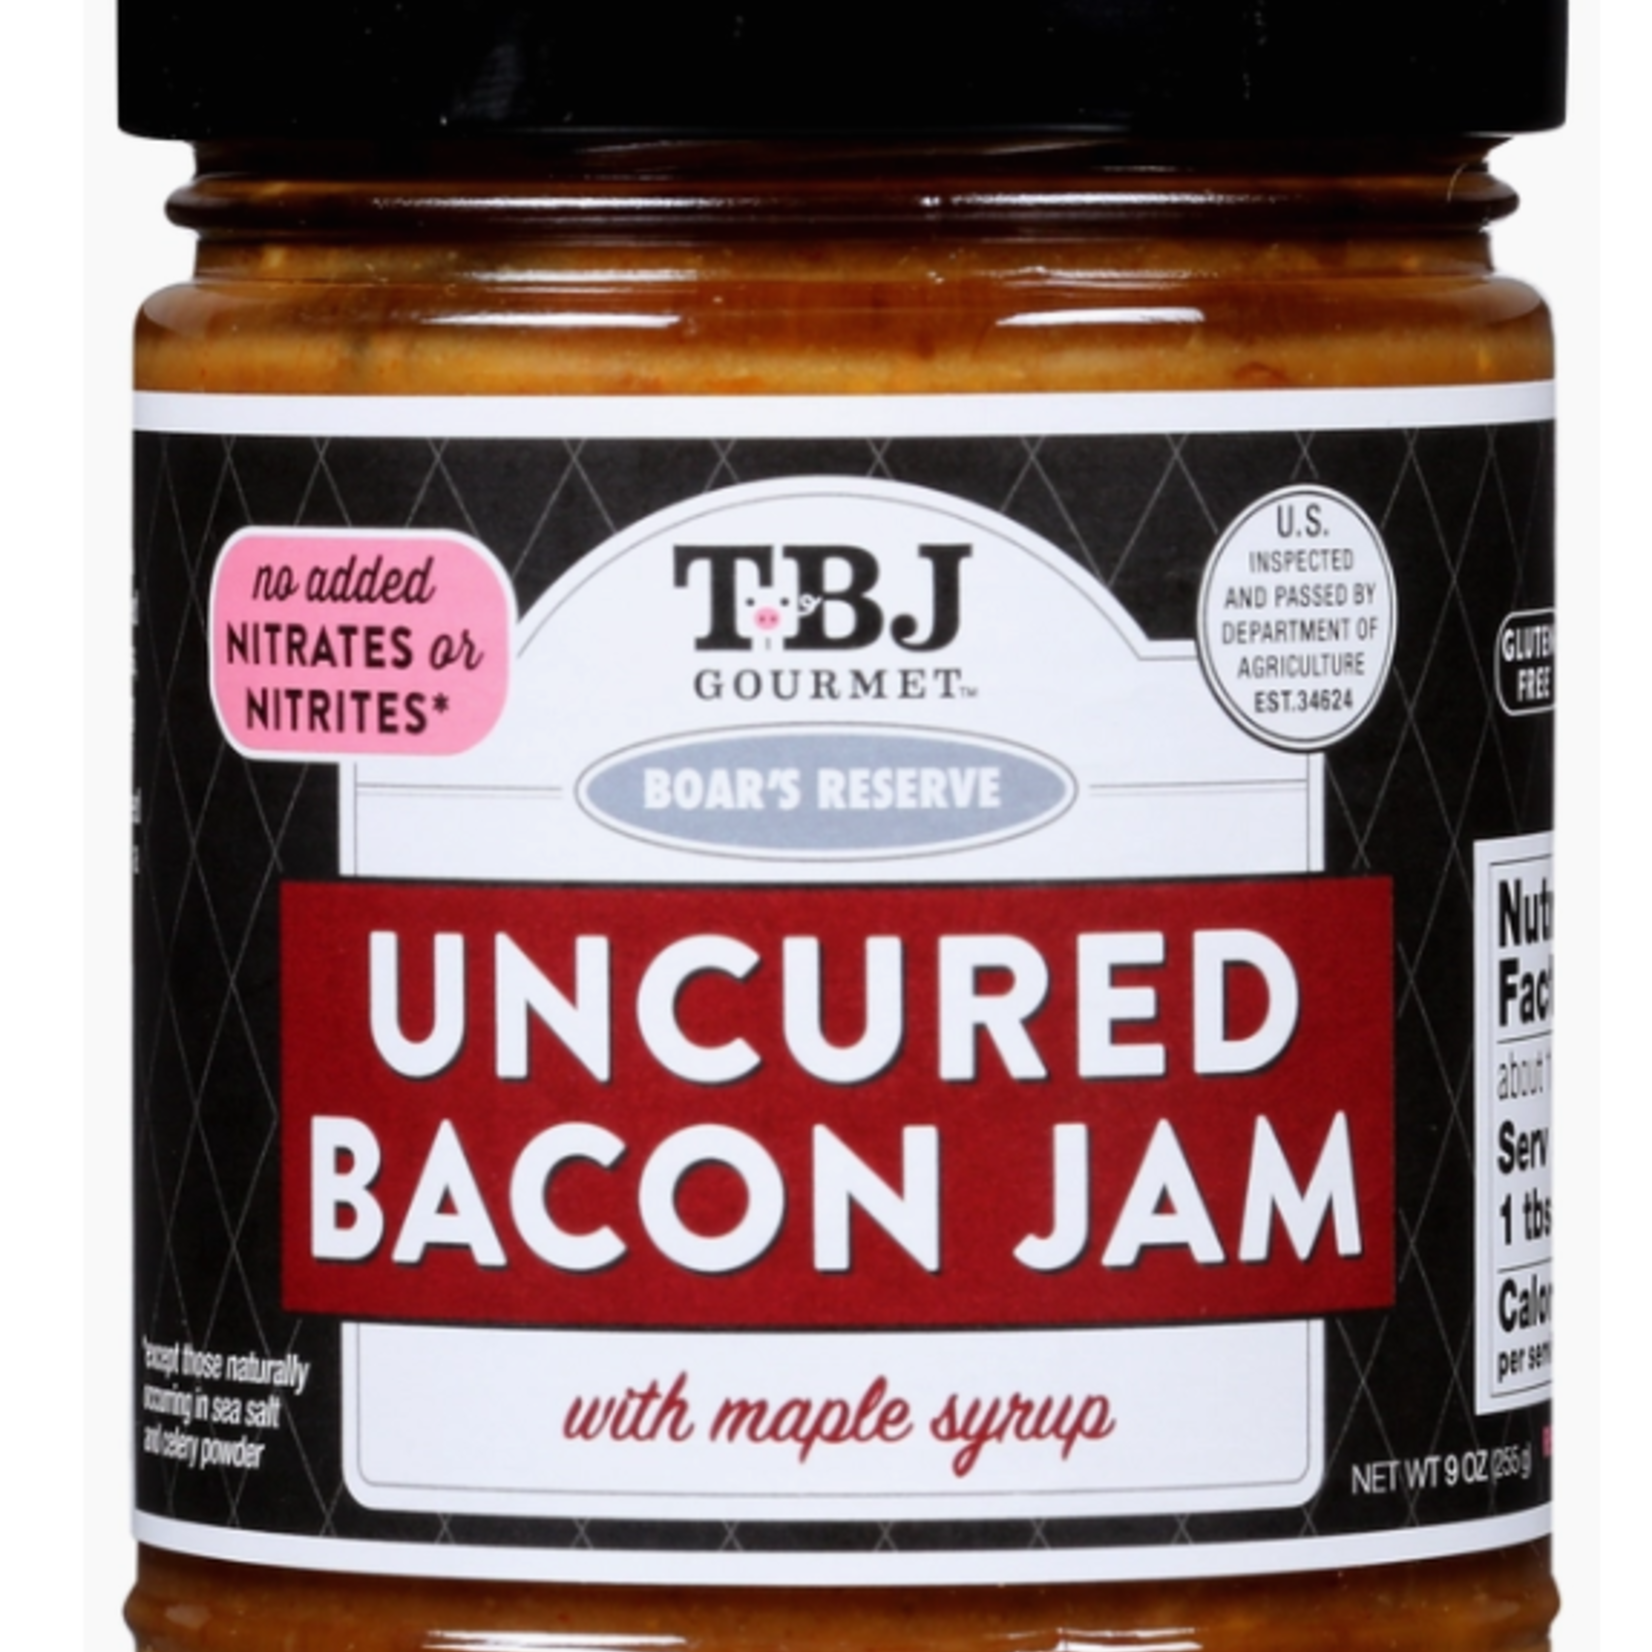 TBJ Gourmet Bacon Jam With Maple Syrup